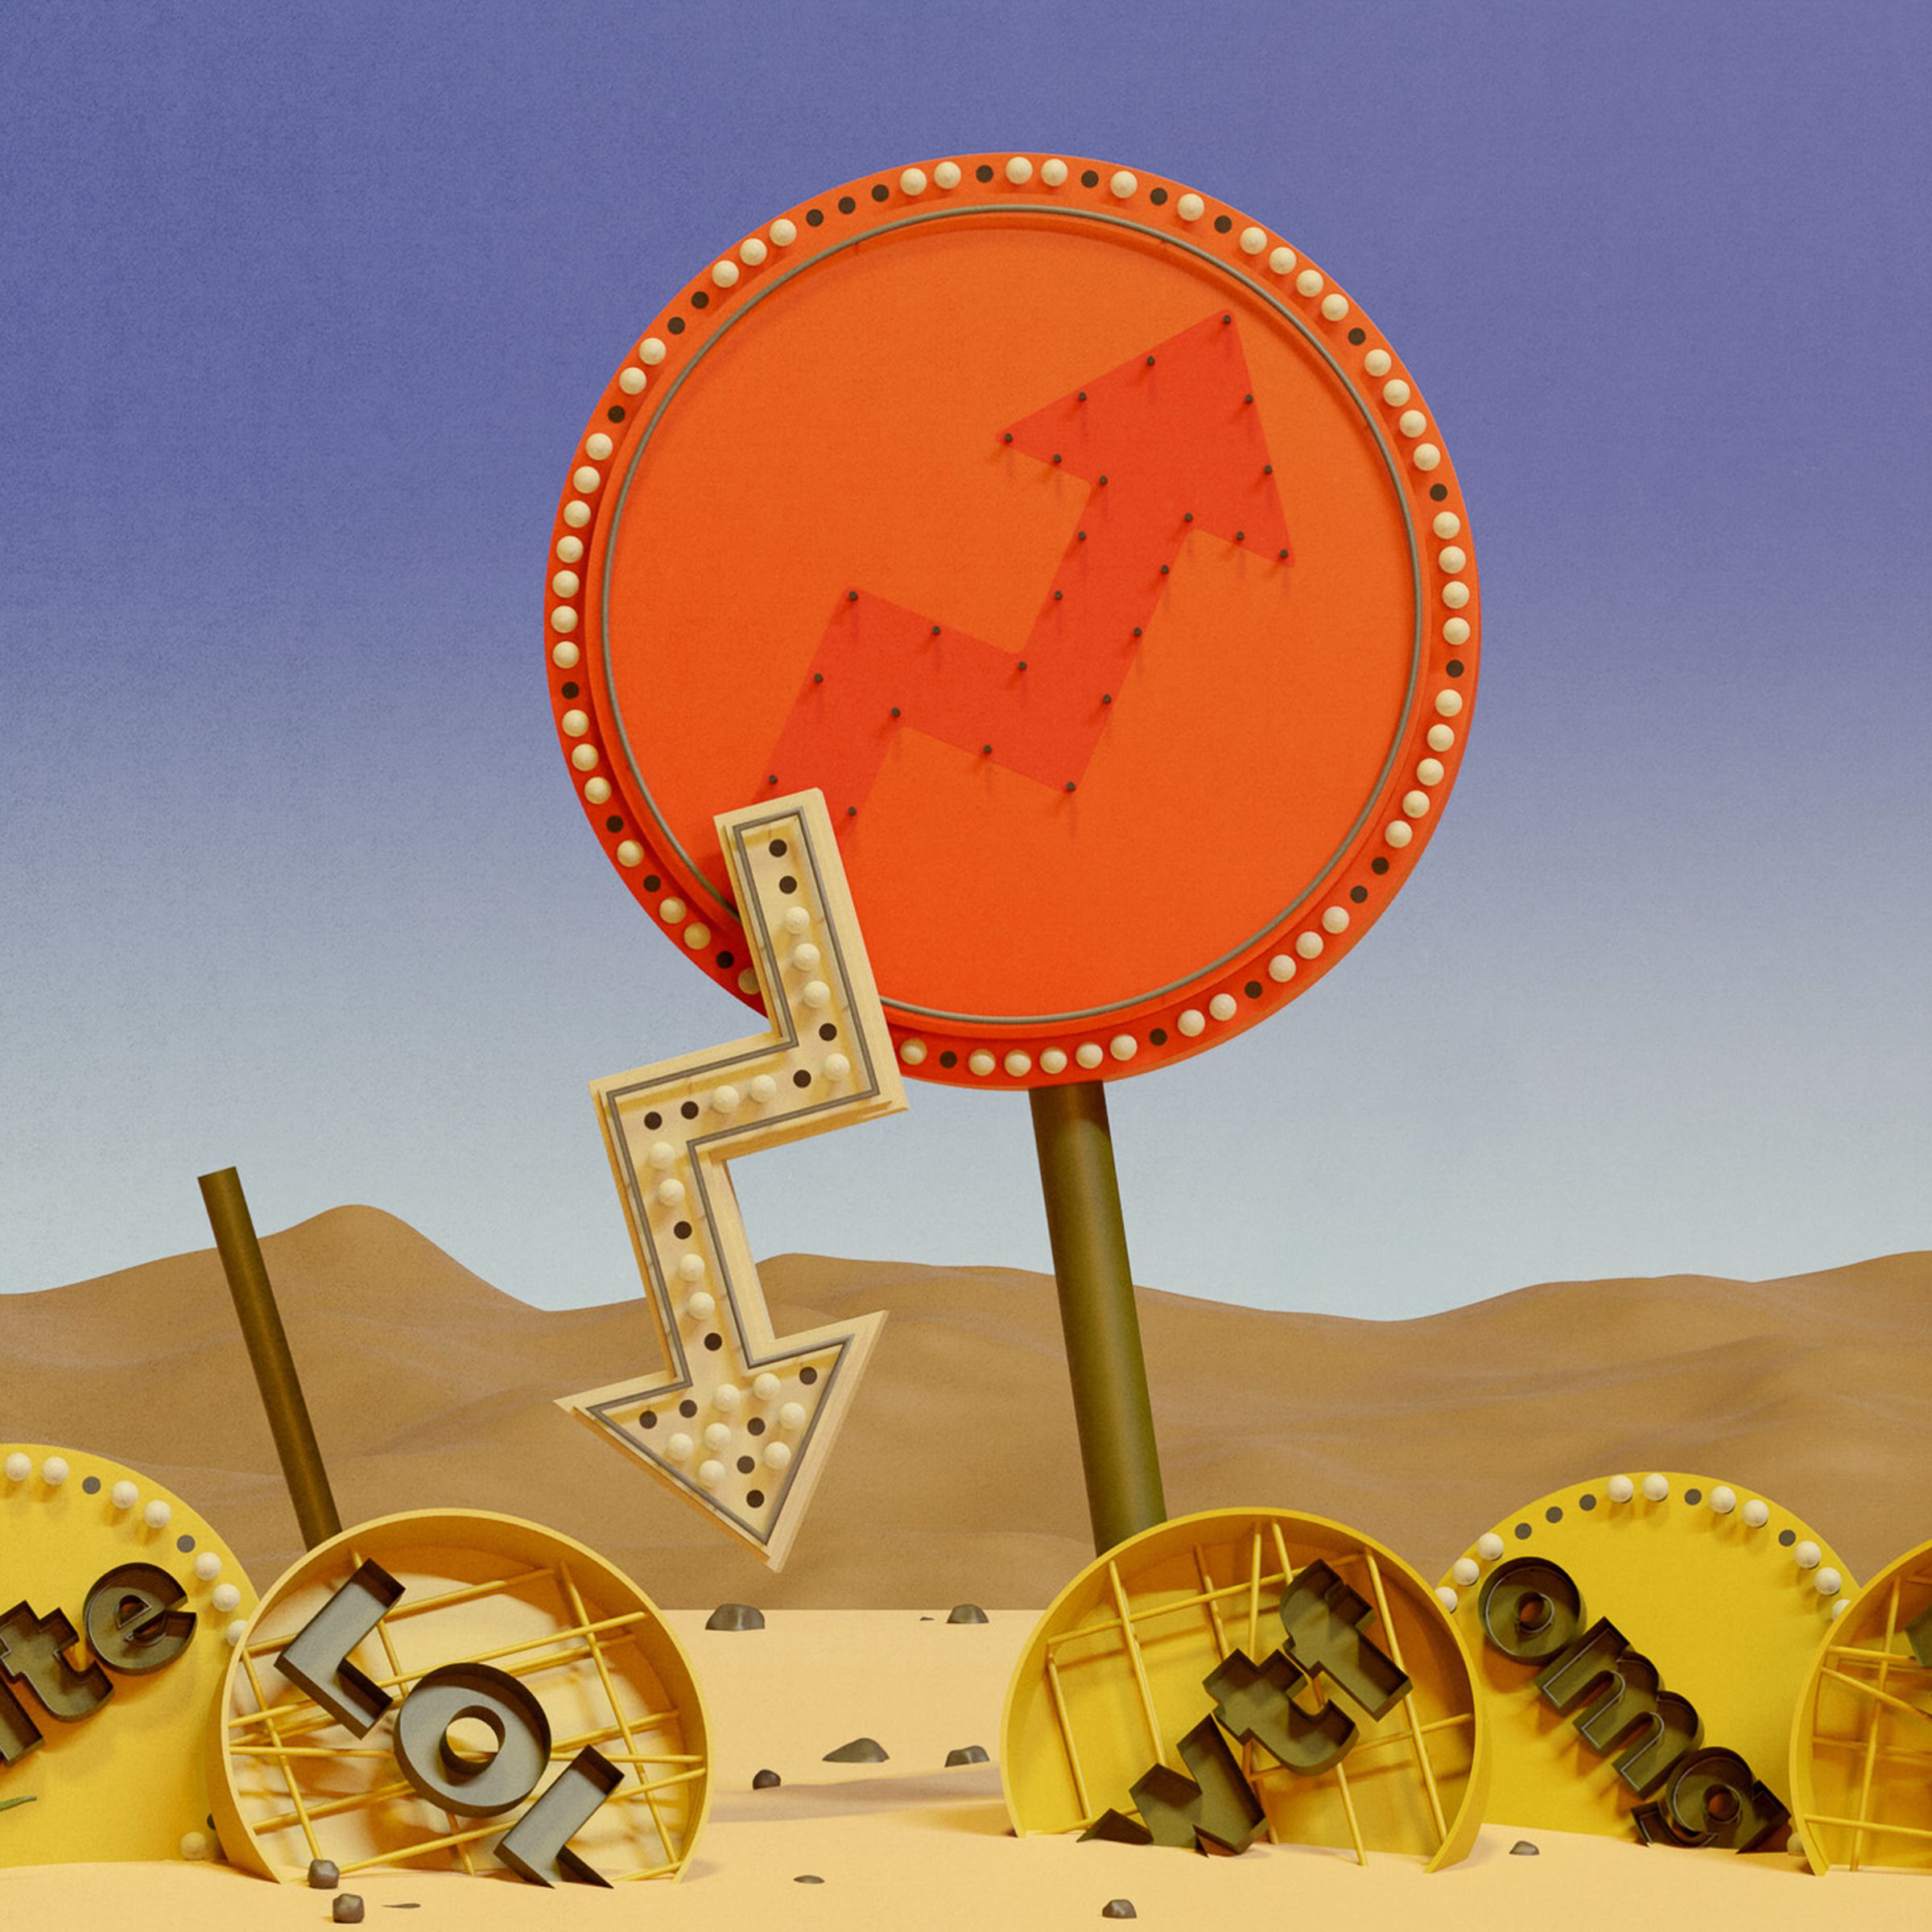 An old beat-up sign in the shape of the BuzzFeed logo icon in a desert setting surrounded by several smaller beat-up yellow signs that say “cute,” “lol,” “wtf,” and “omg” on them.